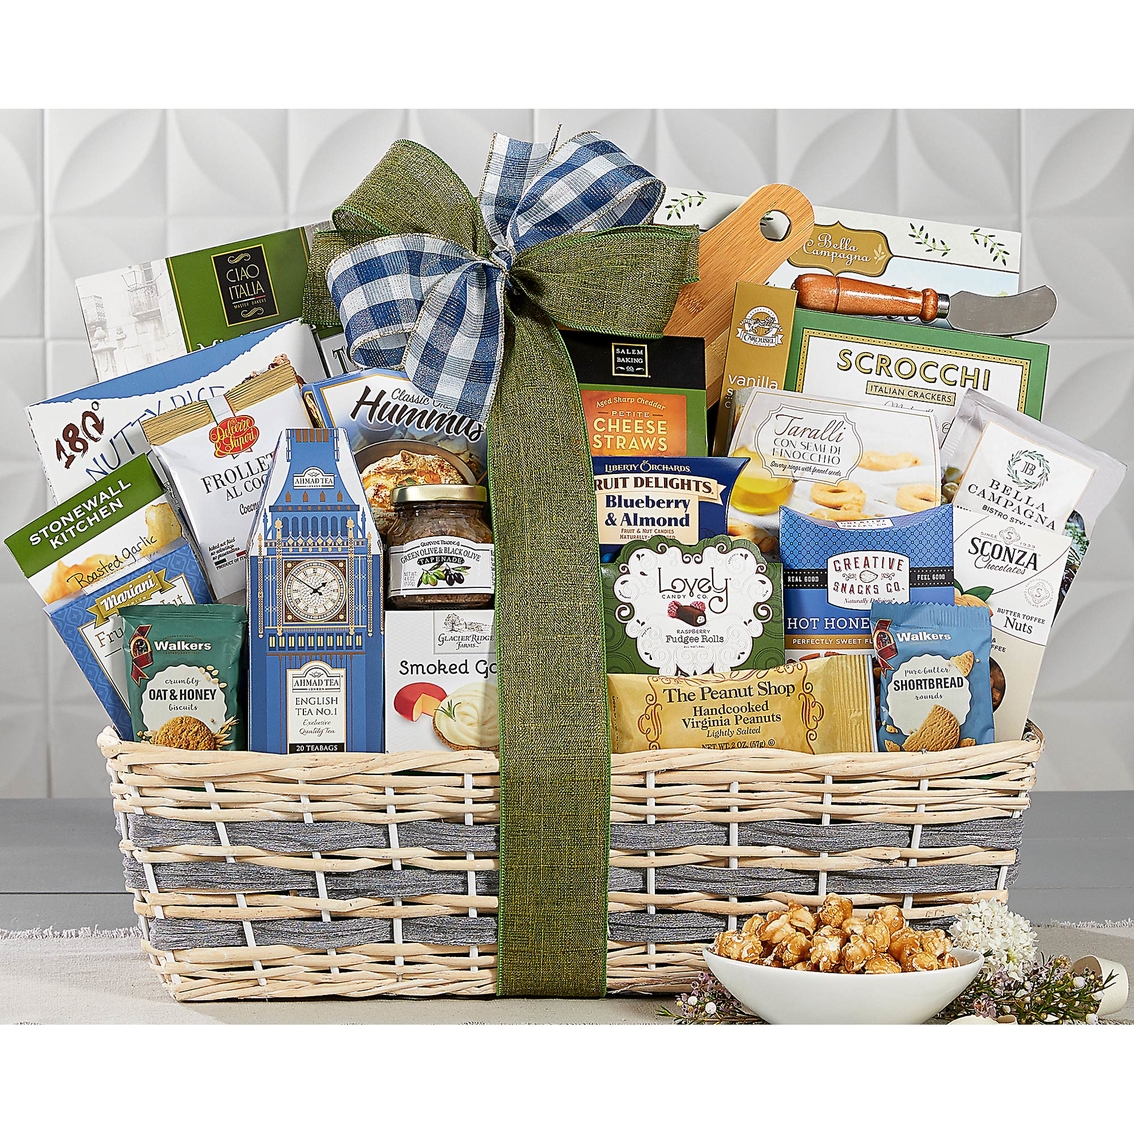 Wine Country Food Baskets The Classic Gourmet Food Basket, Gift Baskets, Food & Gifts